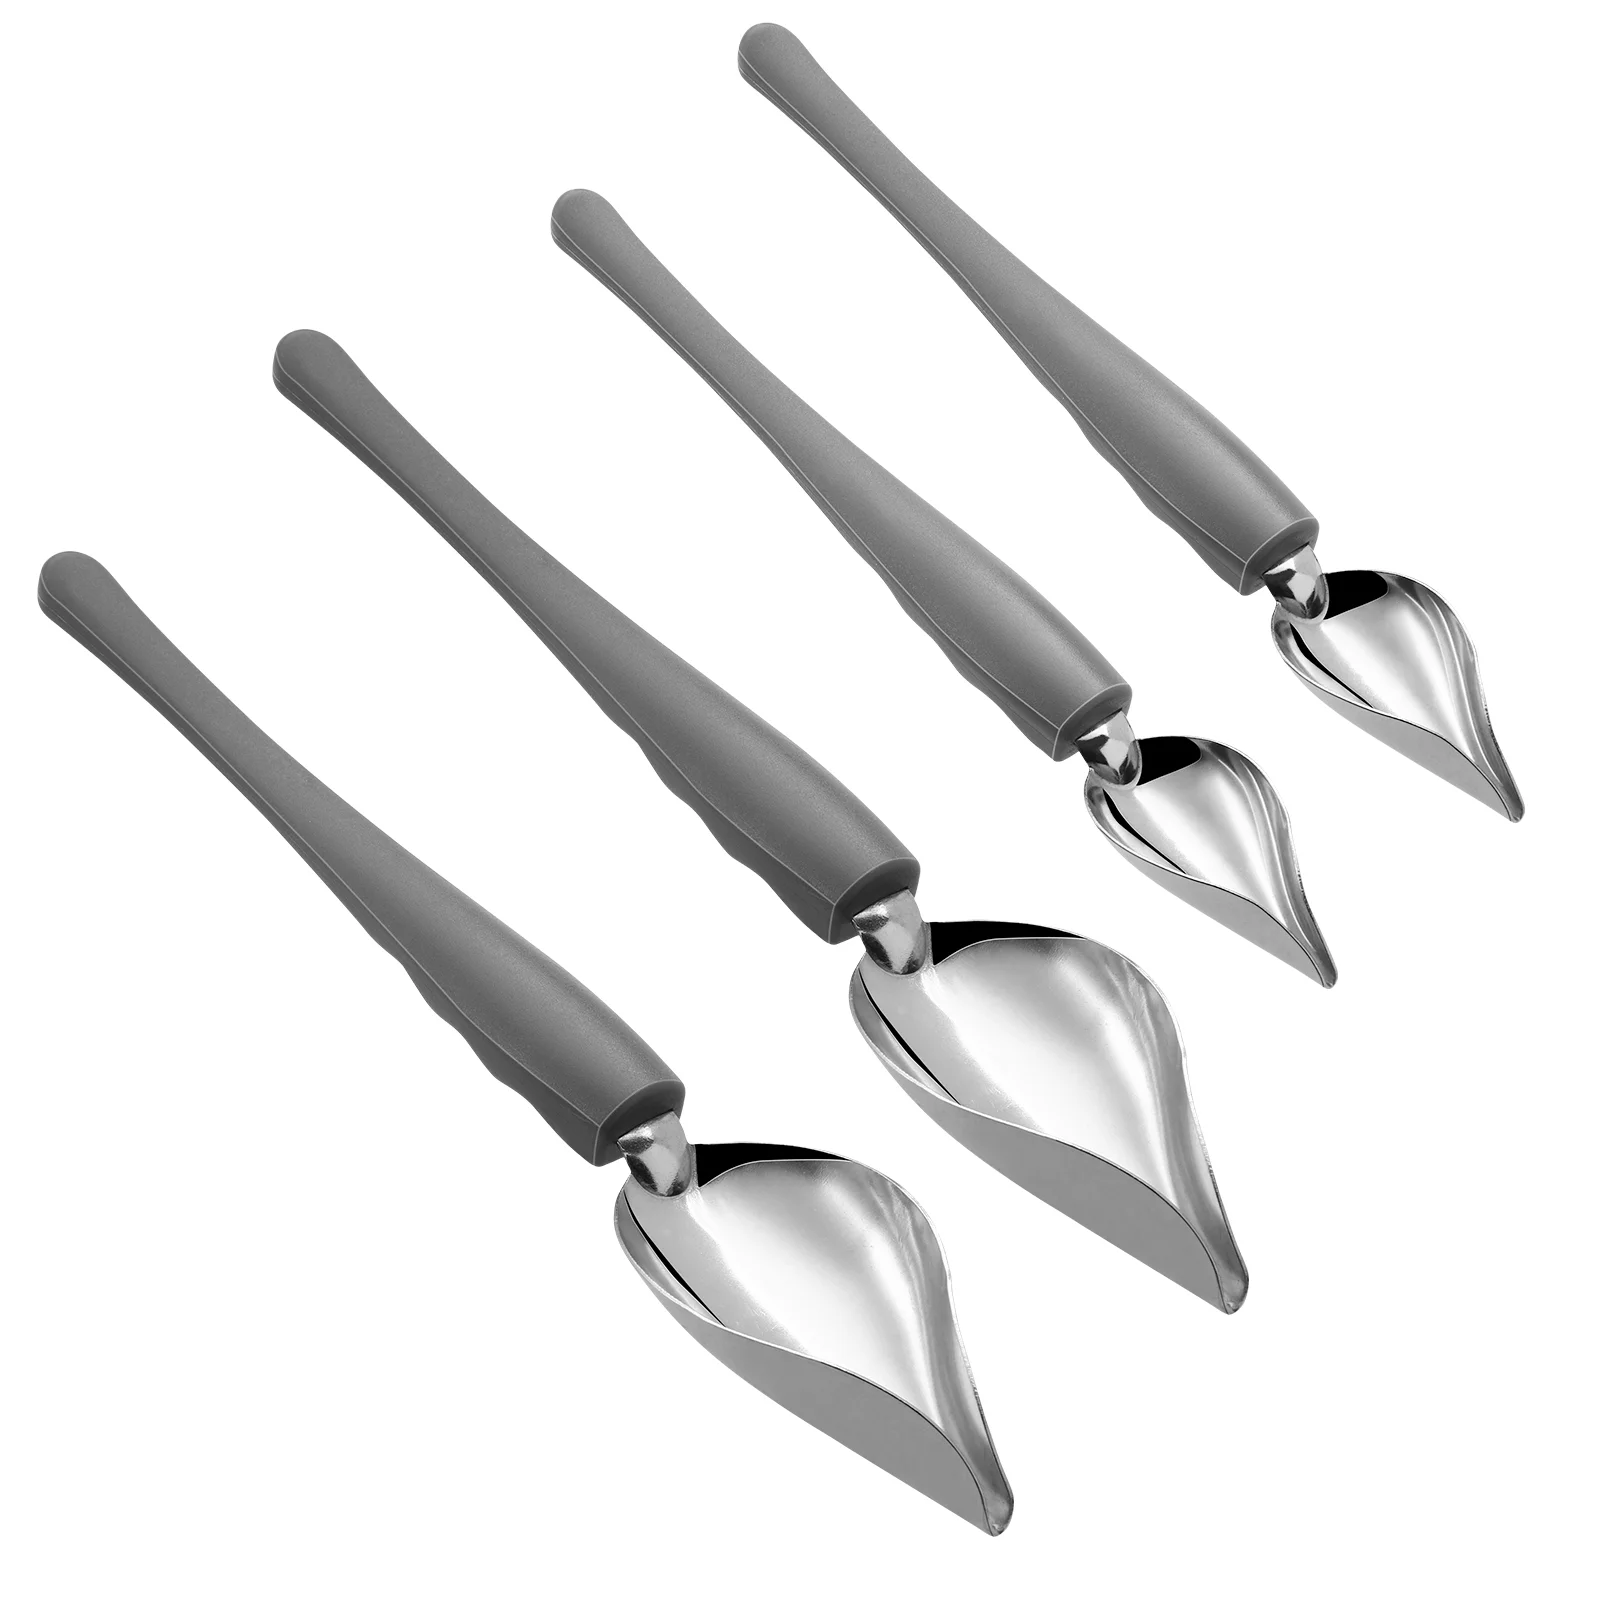 

4pcs Dessert Decorating Spoons Chocolate Dipping Tools Multipurpose Stainless Steel Spoons Chef Spoons